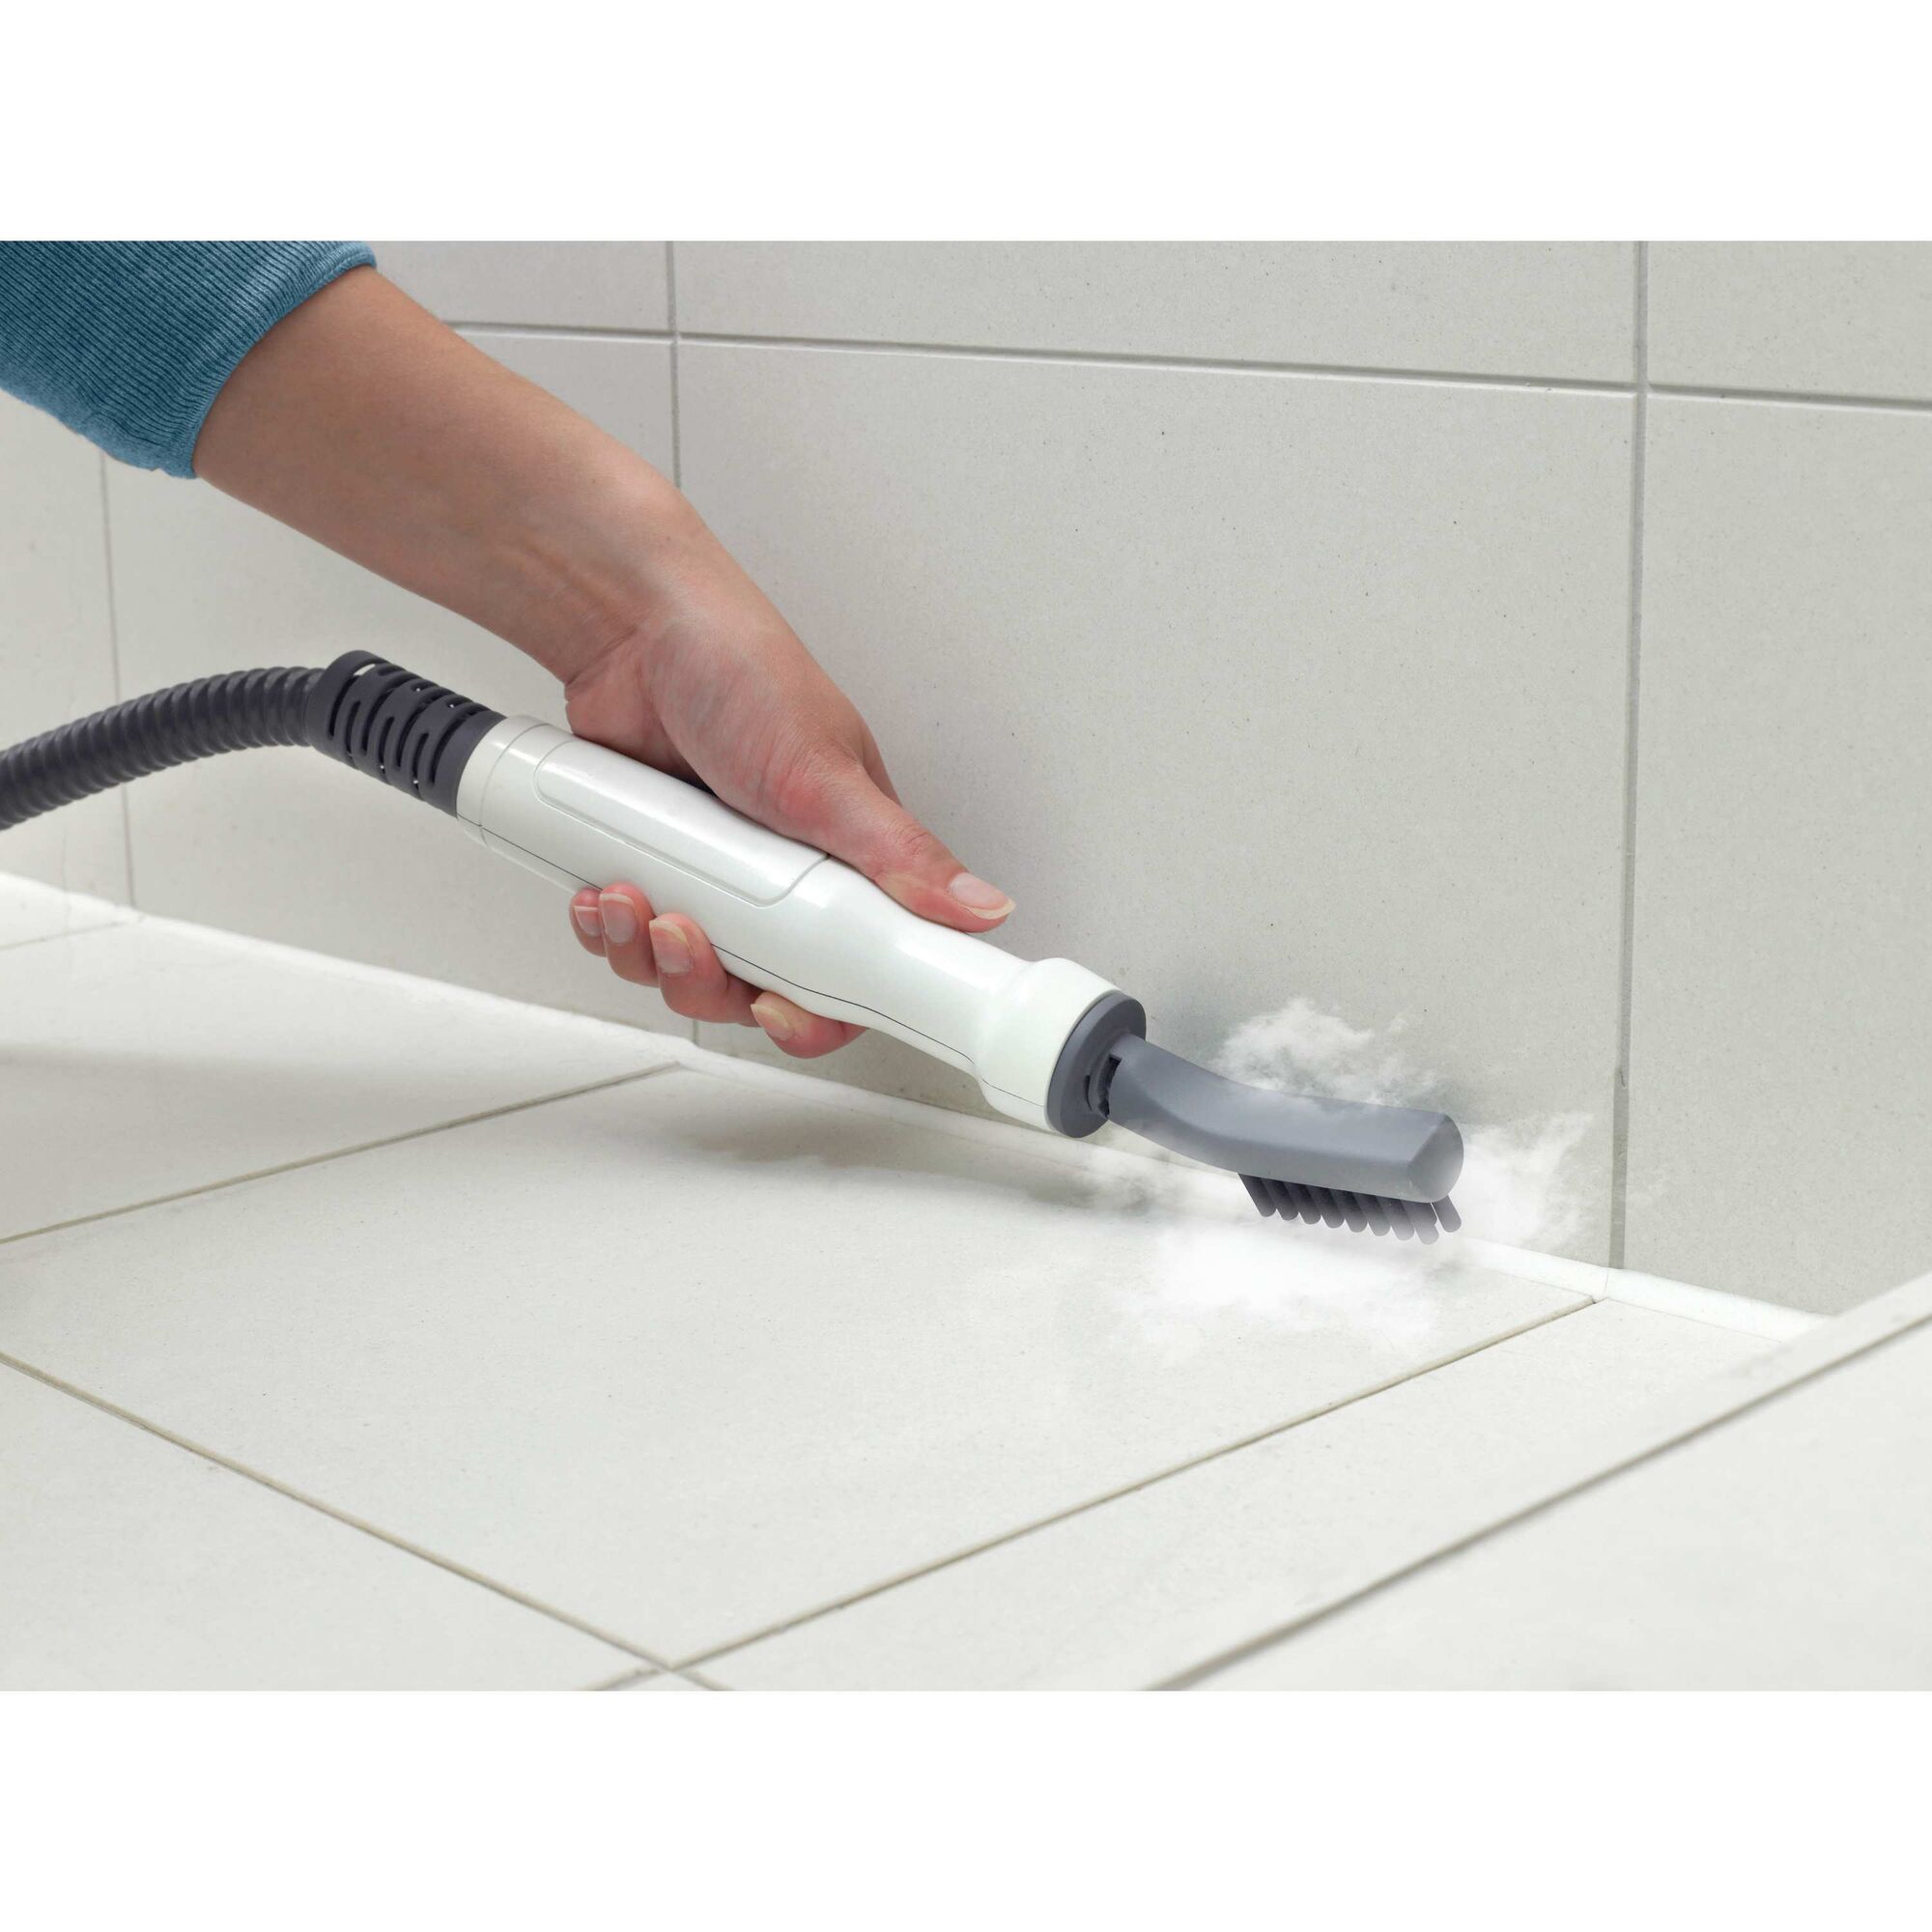 7 in 1 Steam mop with steamglove handheld steamer cleaning title.